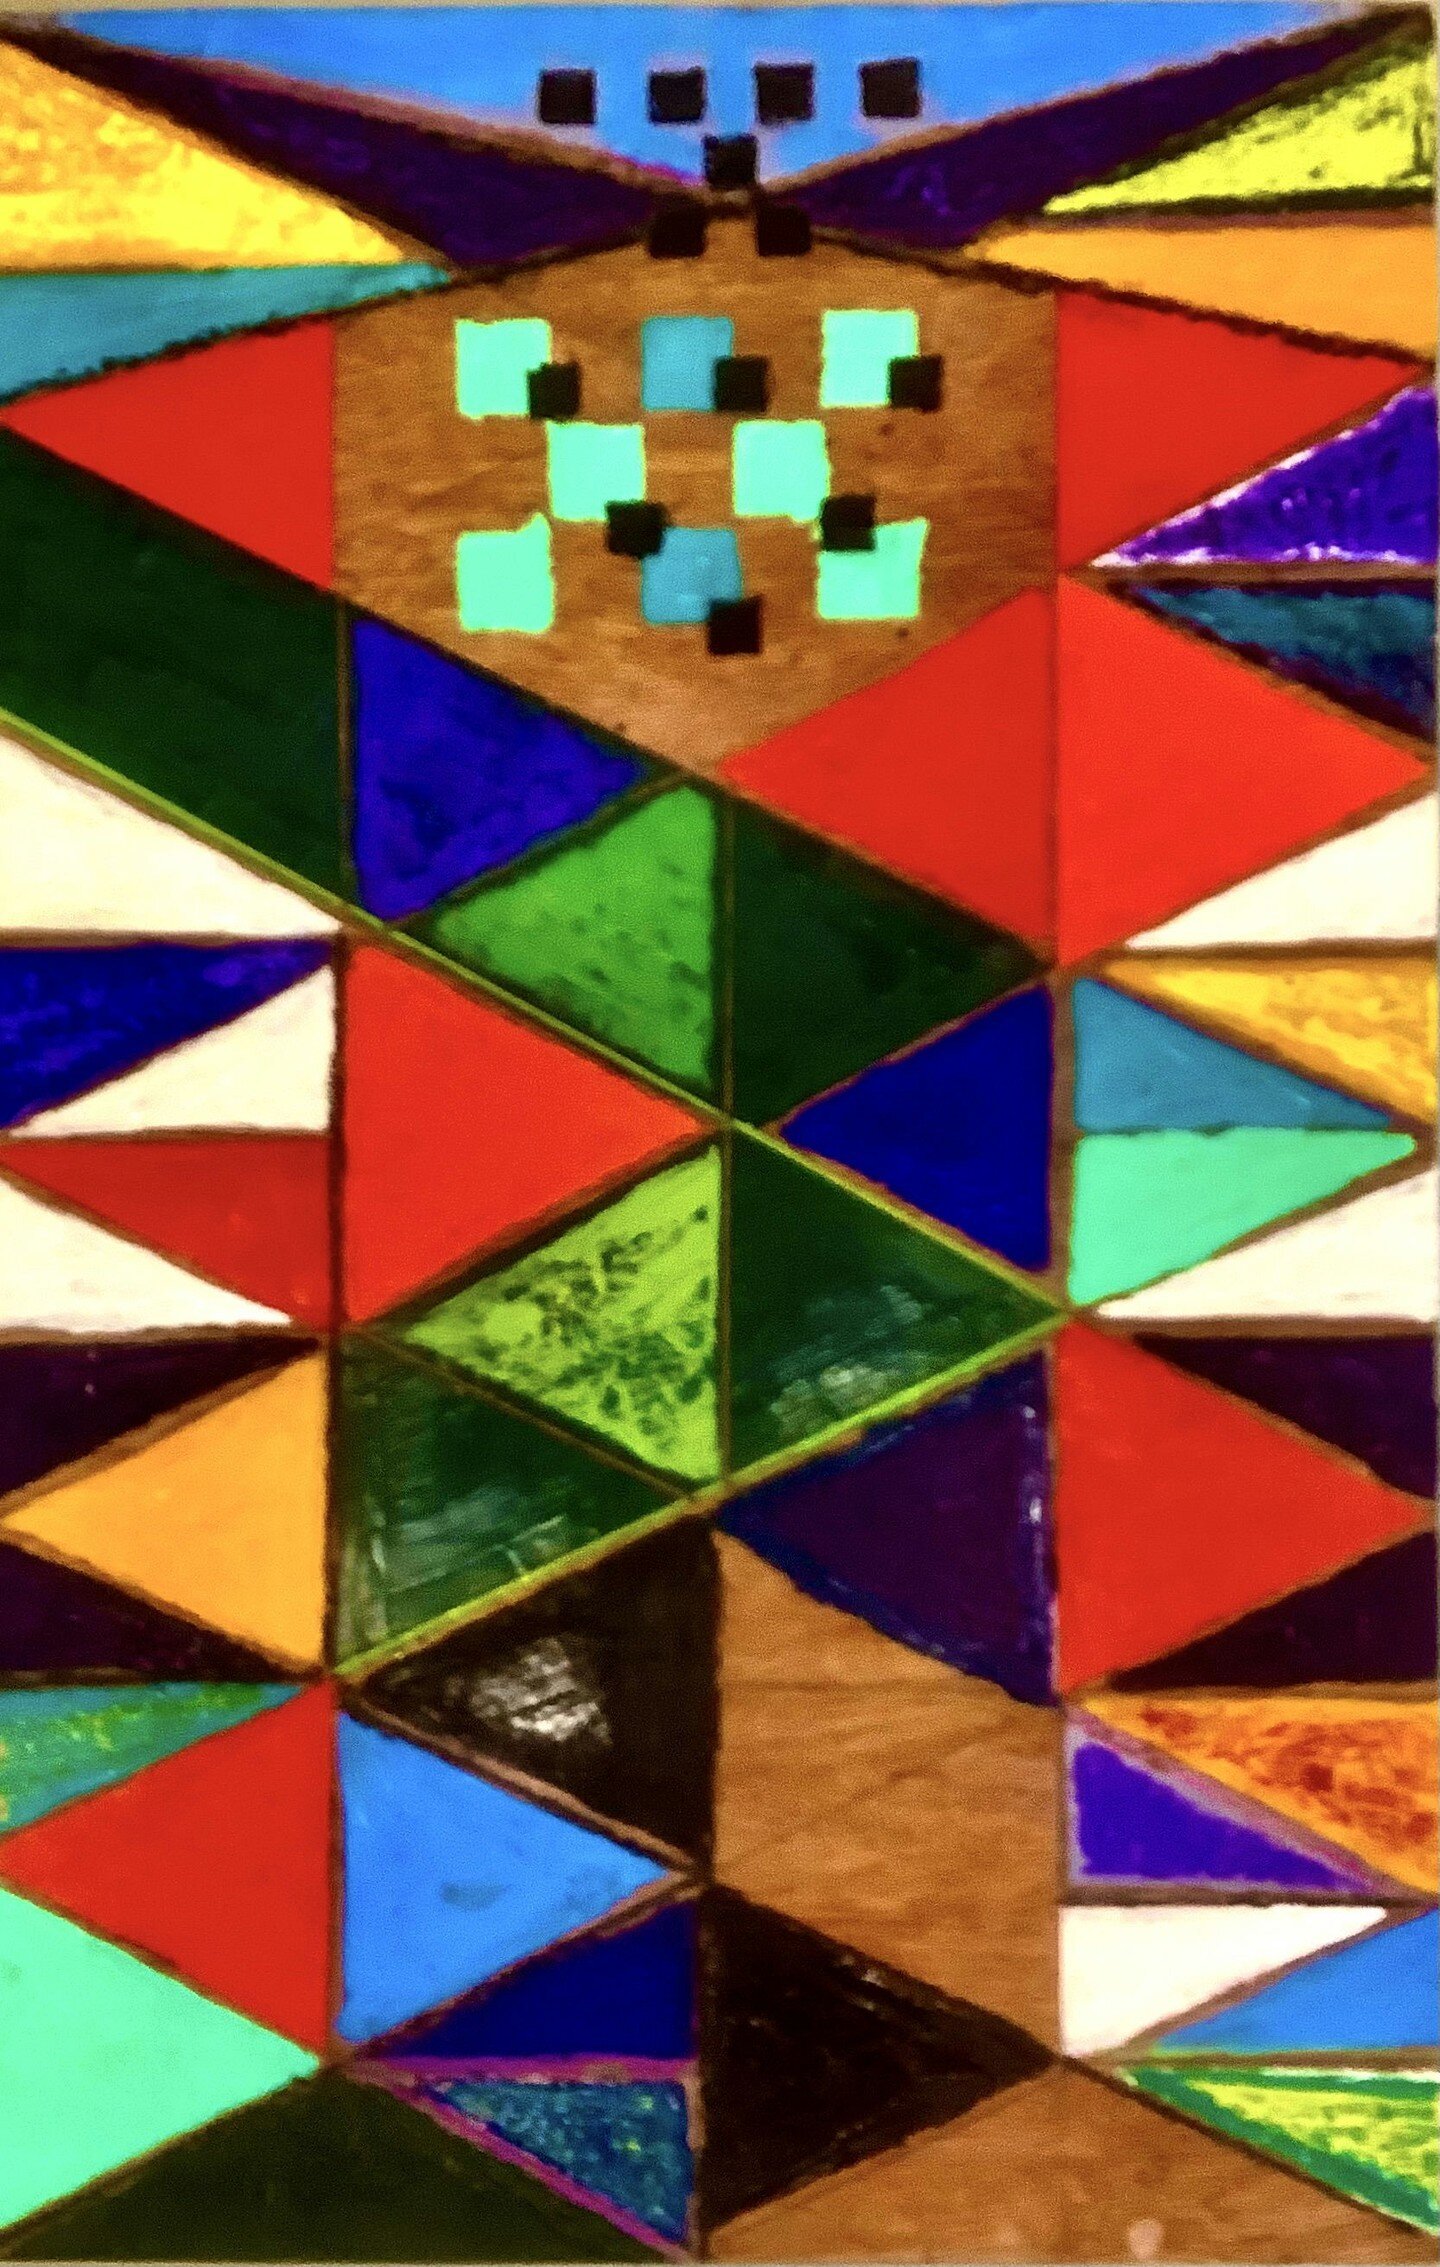 &quot;Argus&quot;, encaustic on wood panel, by Ted Warchal.

In the February 2024 show, BACK TO BASICS, https://www.plasticclub.org/events/back-to-basics

#PlasticClubArt